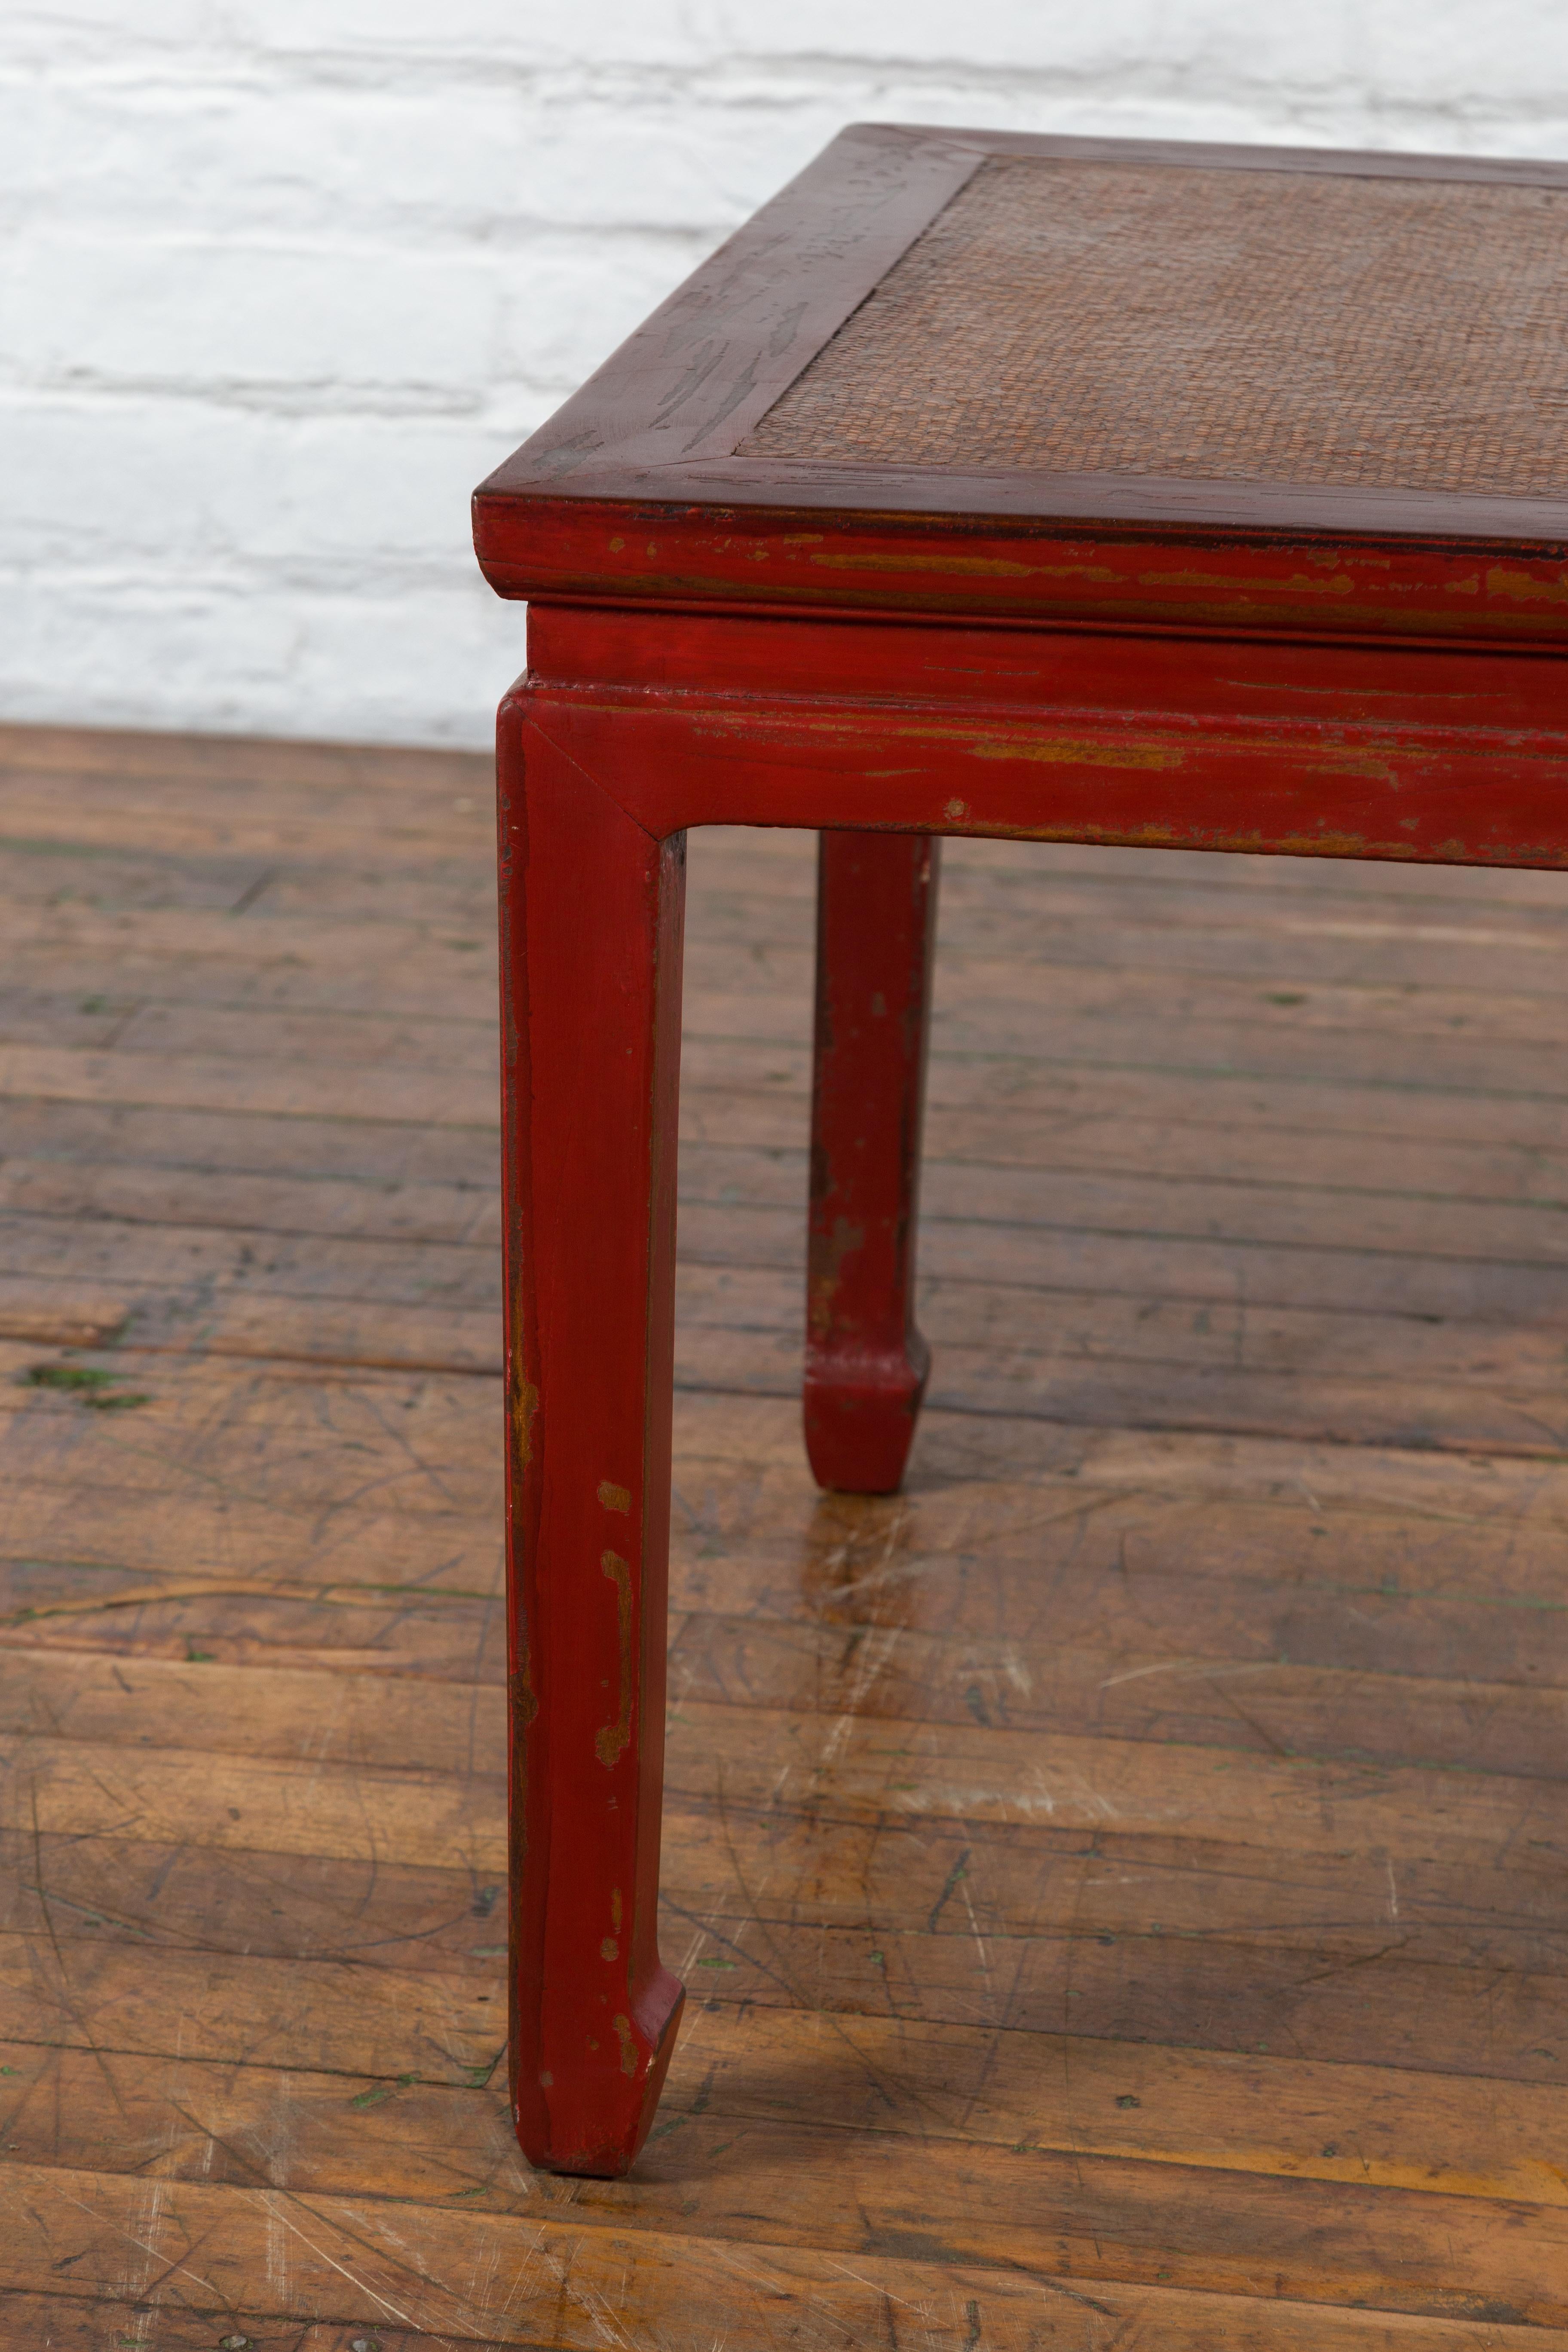 Chinese Qing Dynasty 19th Century Red Lacquer Side Table with Woven Rattan Top For Sale 4